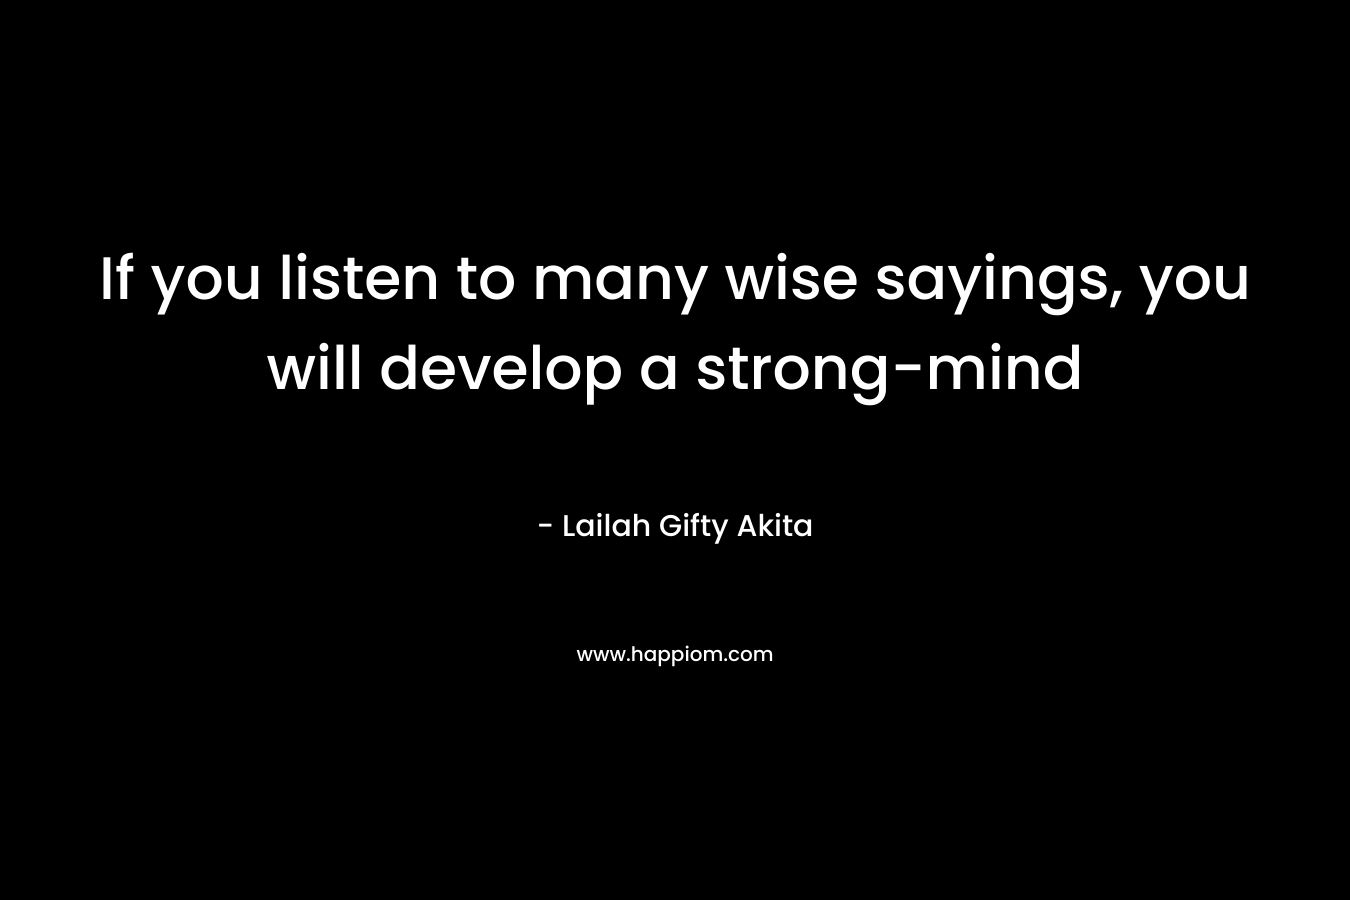 If you listen to many wise sayings, you will develop a strong-mind – Lailah Gifty Akita